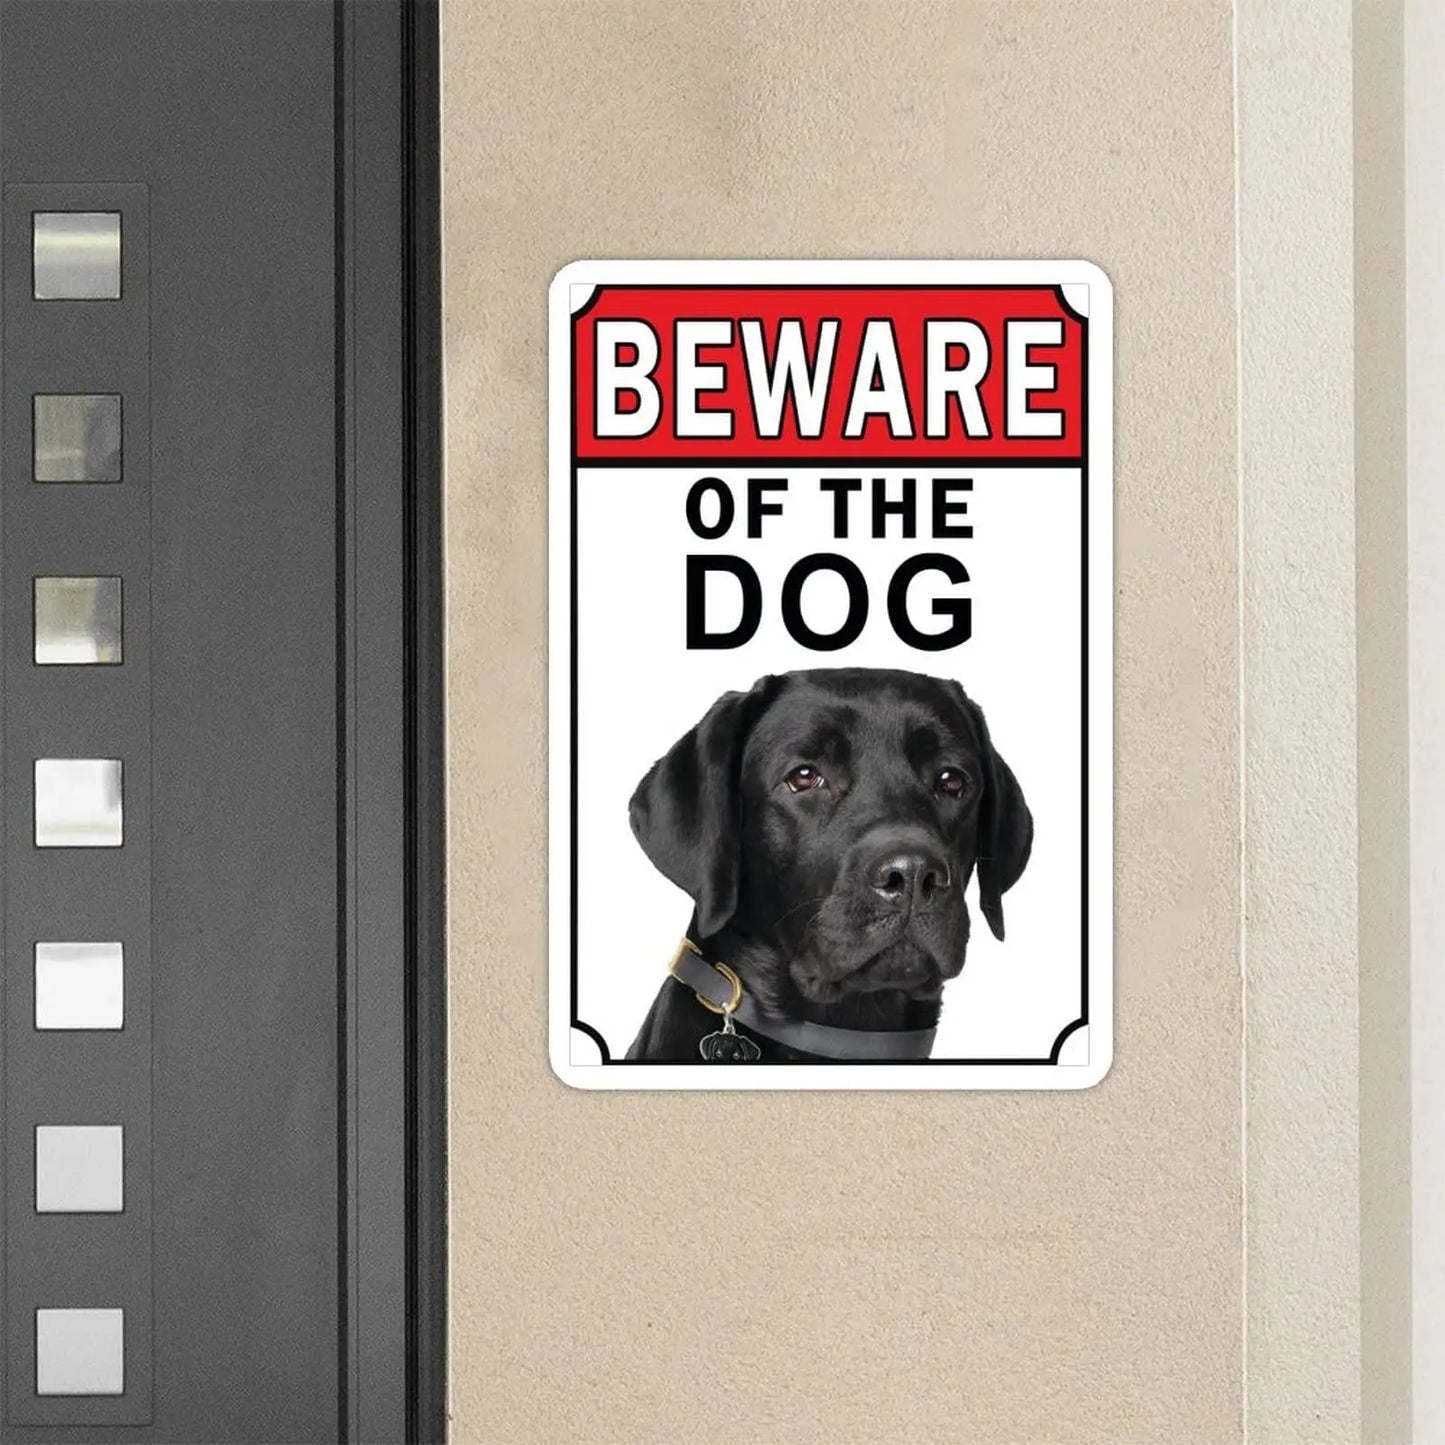 NoneQeleve Beware of The Dog Aluminum Metal Sign Black Labrador Metal Tin Sign 12x18 inch Business Security Sign Home Wall Decor